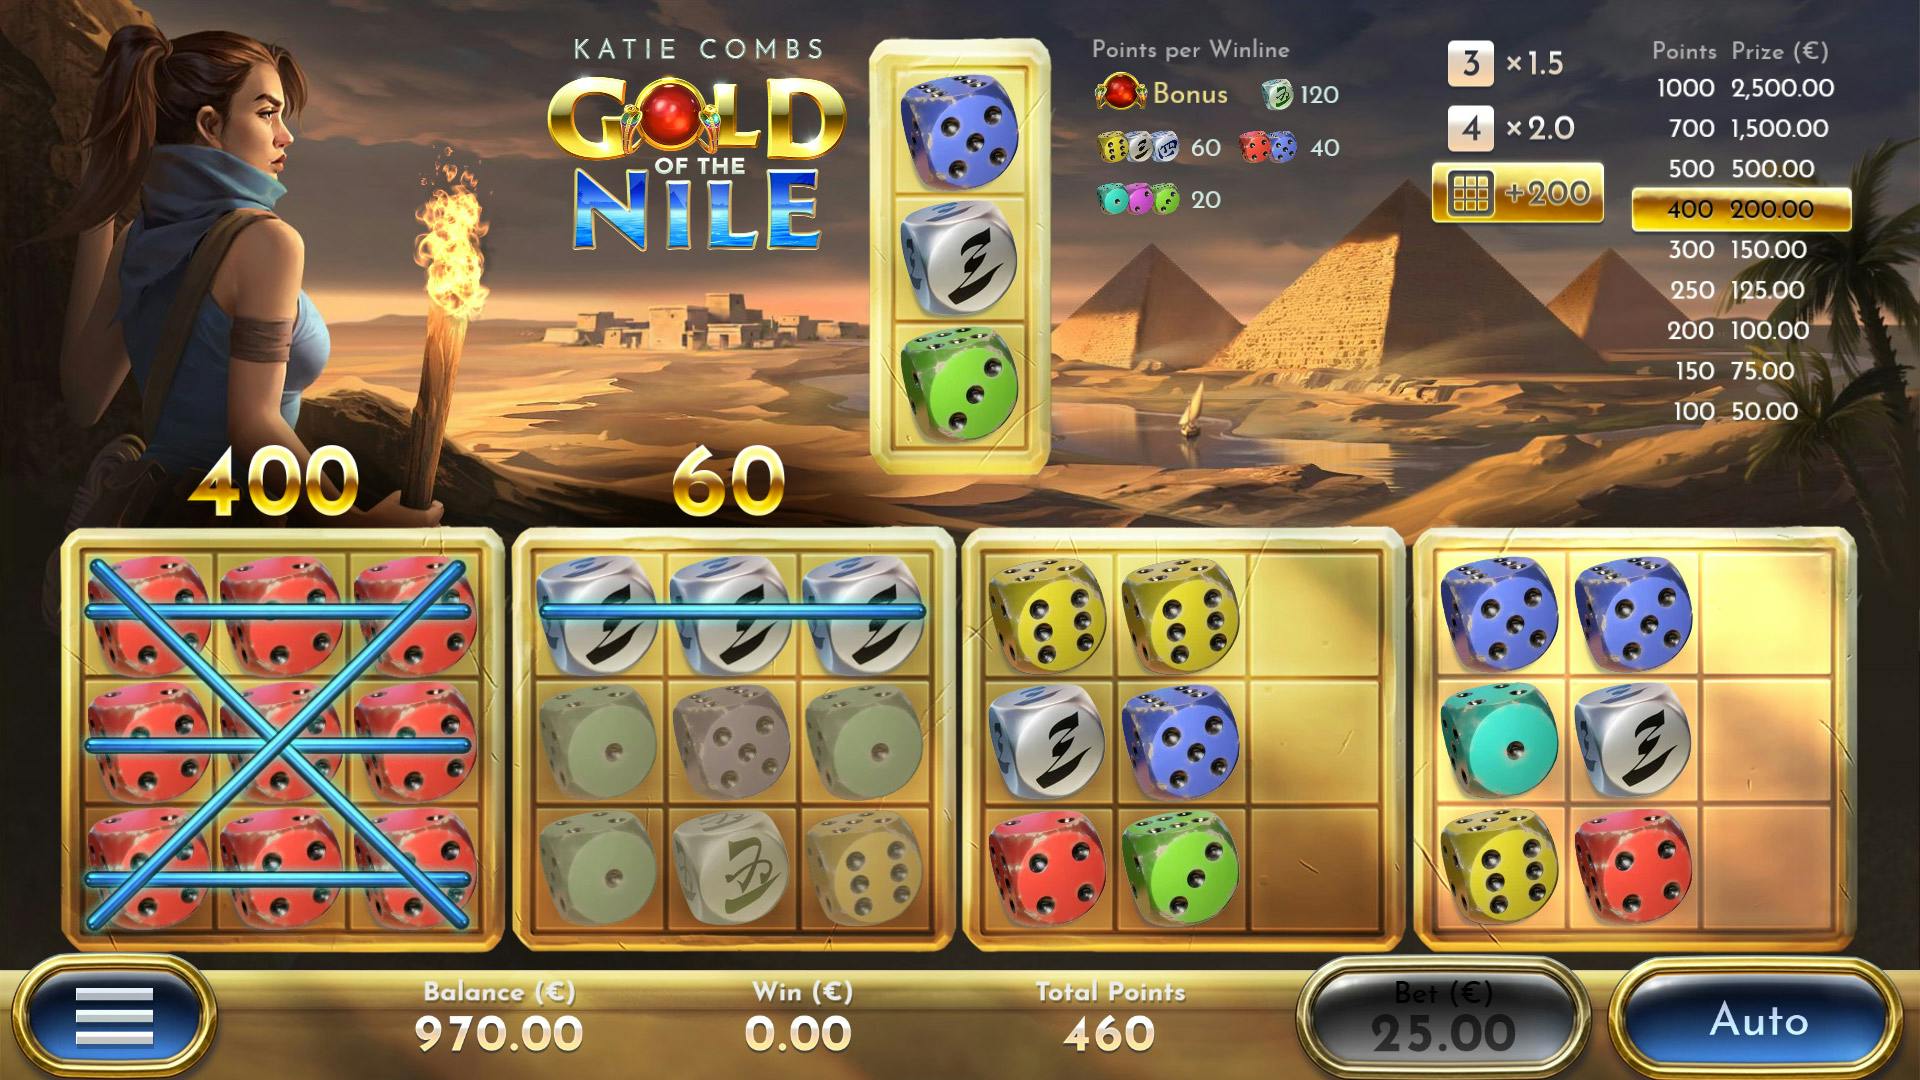 Airdice Katie Combs Gold of the Nile dice spel